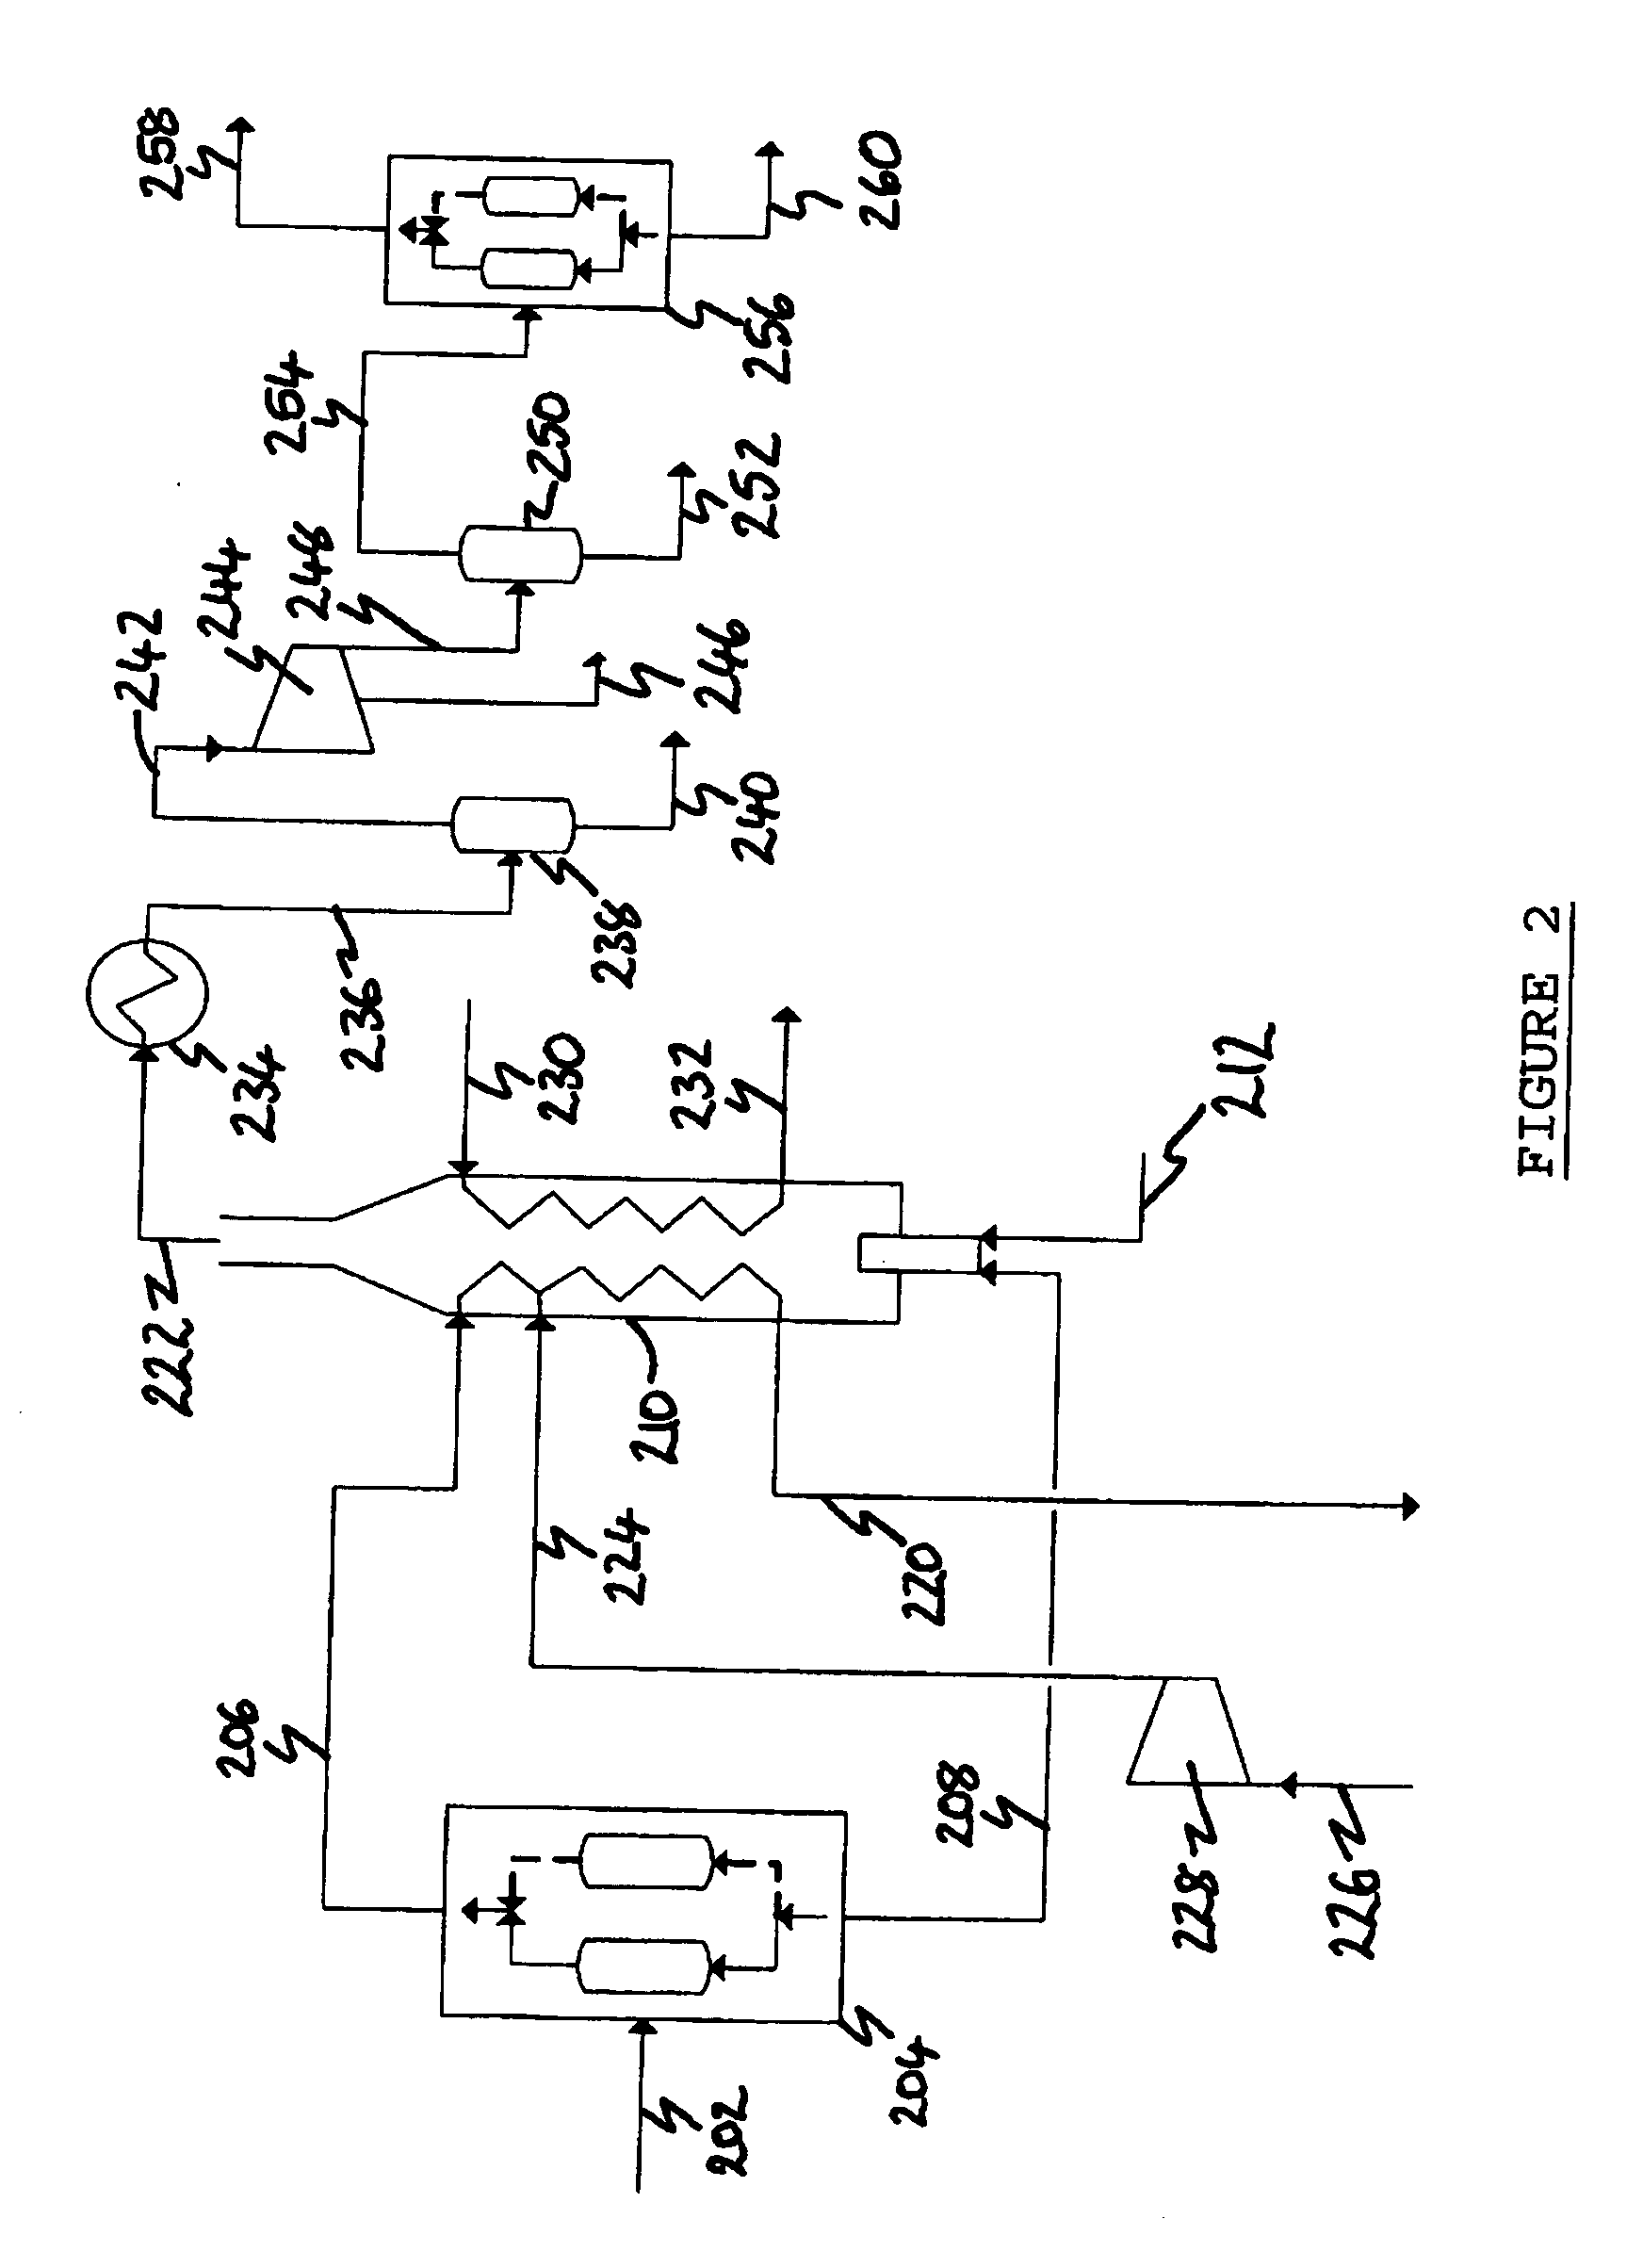 Method of treating a gaseous mixture comprising hydrogen and carbon dioxide